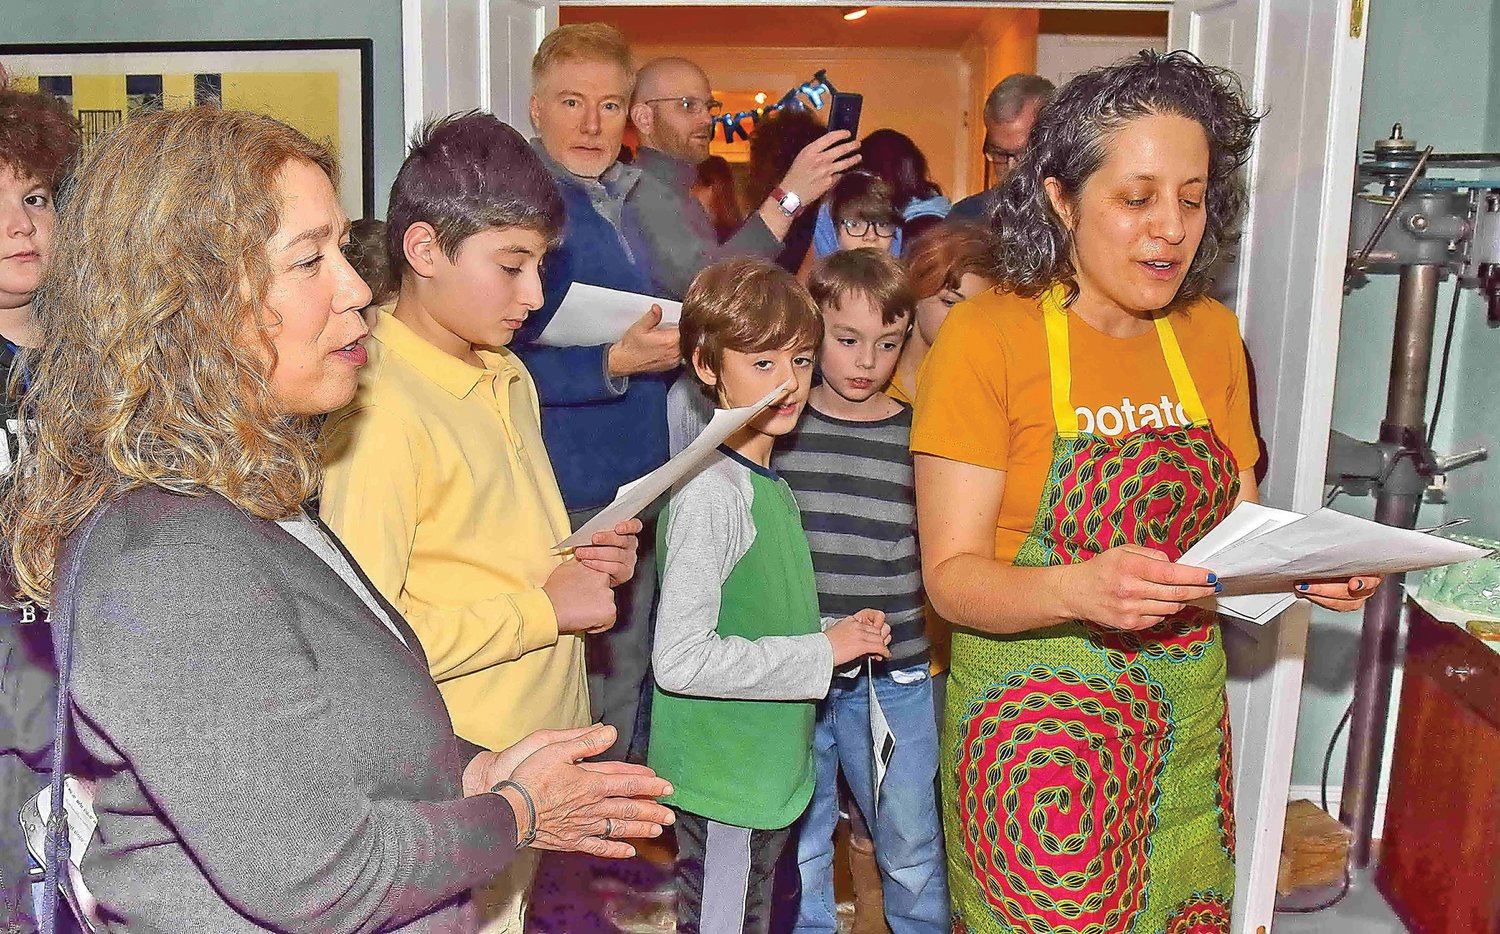 Rabbi Dianna Miller recites the traditional blessing over the menorahs. Photograph by Gordon and Libby Nieburg.